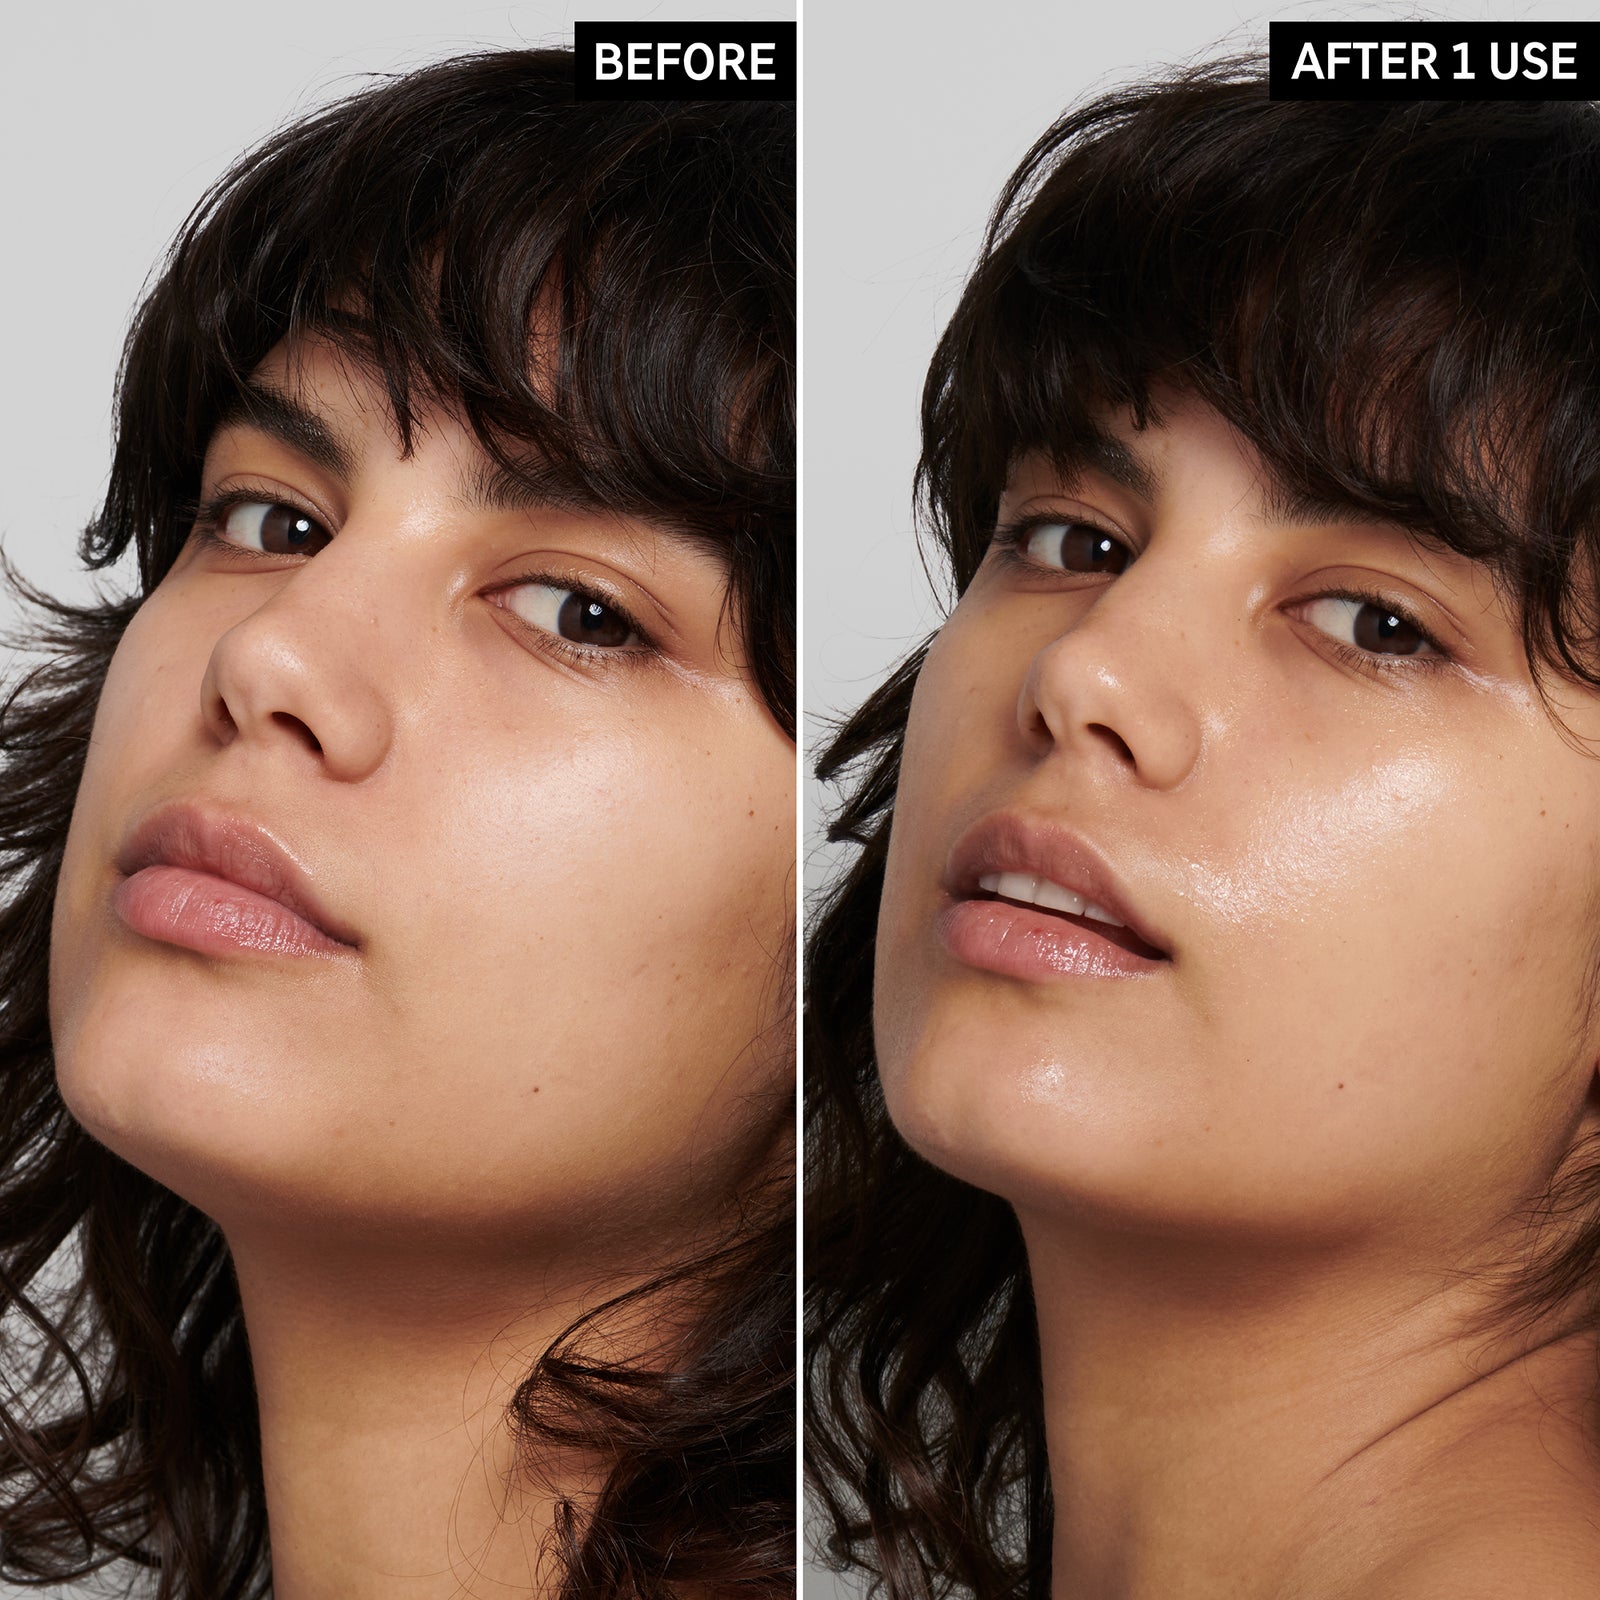 Polyglutamic Acid Serum before and after 1 use, side by side imagery.